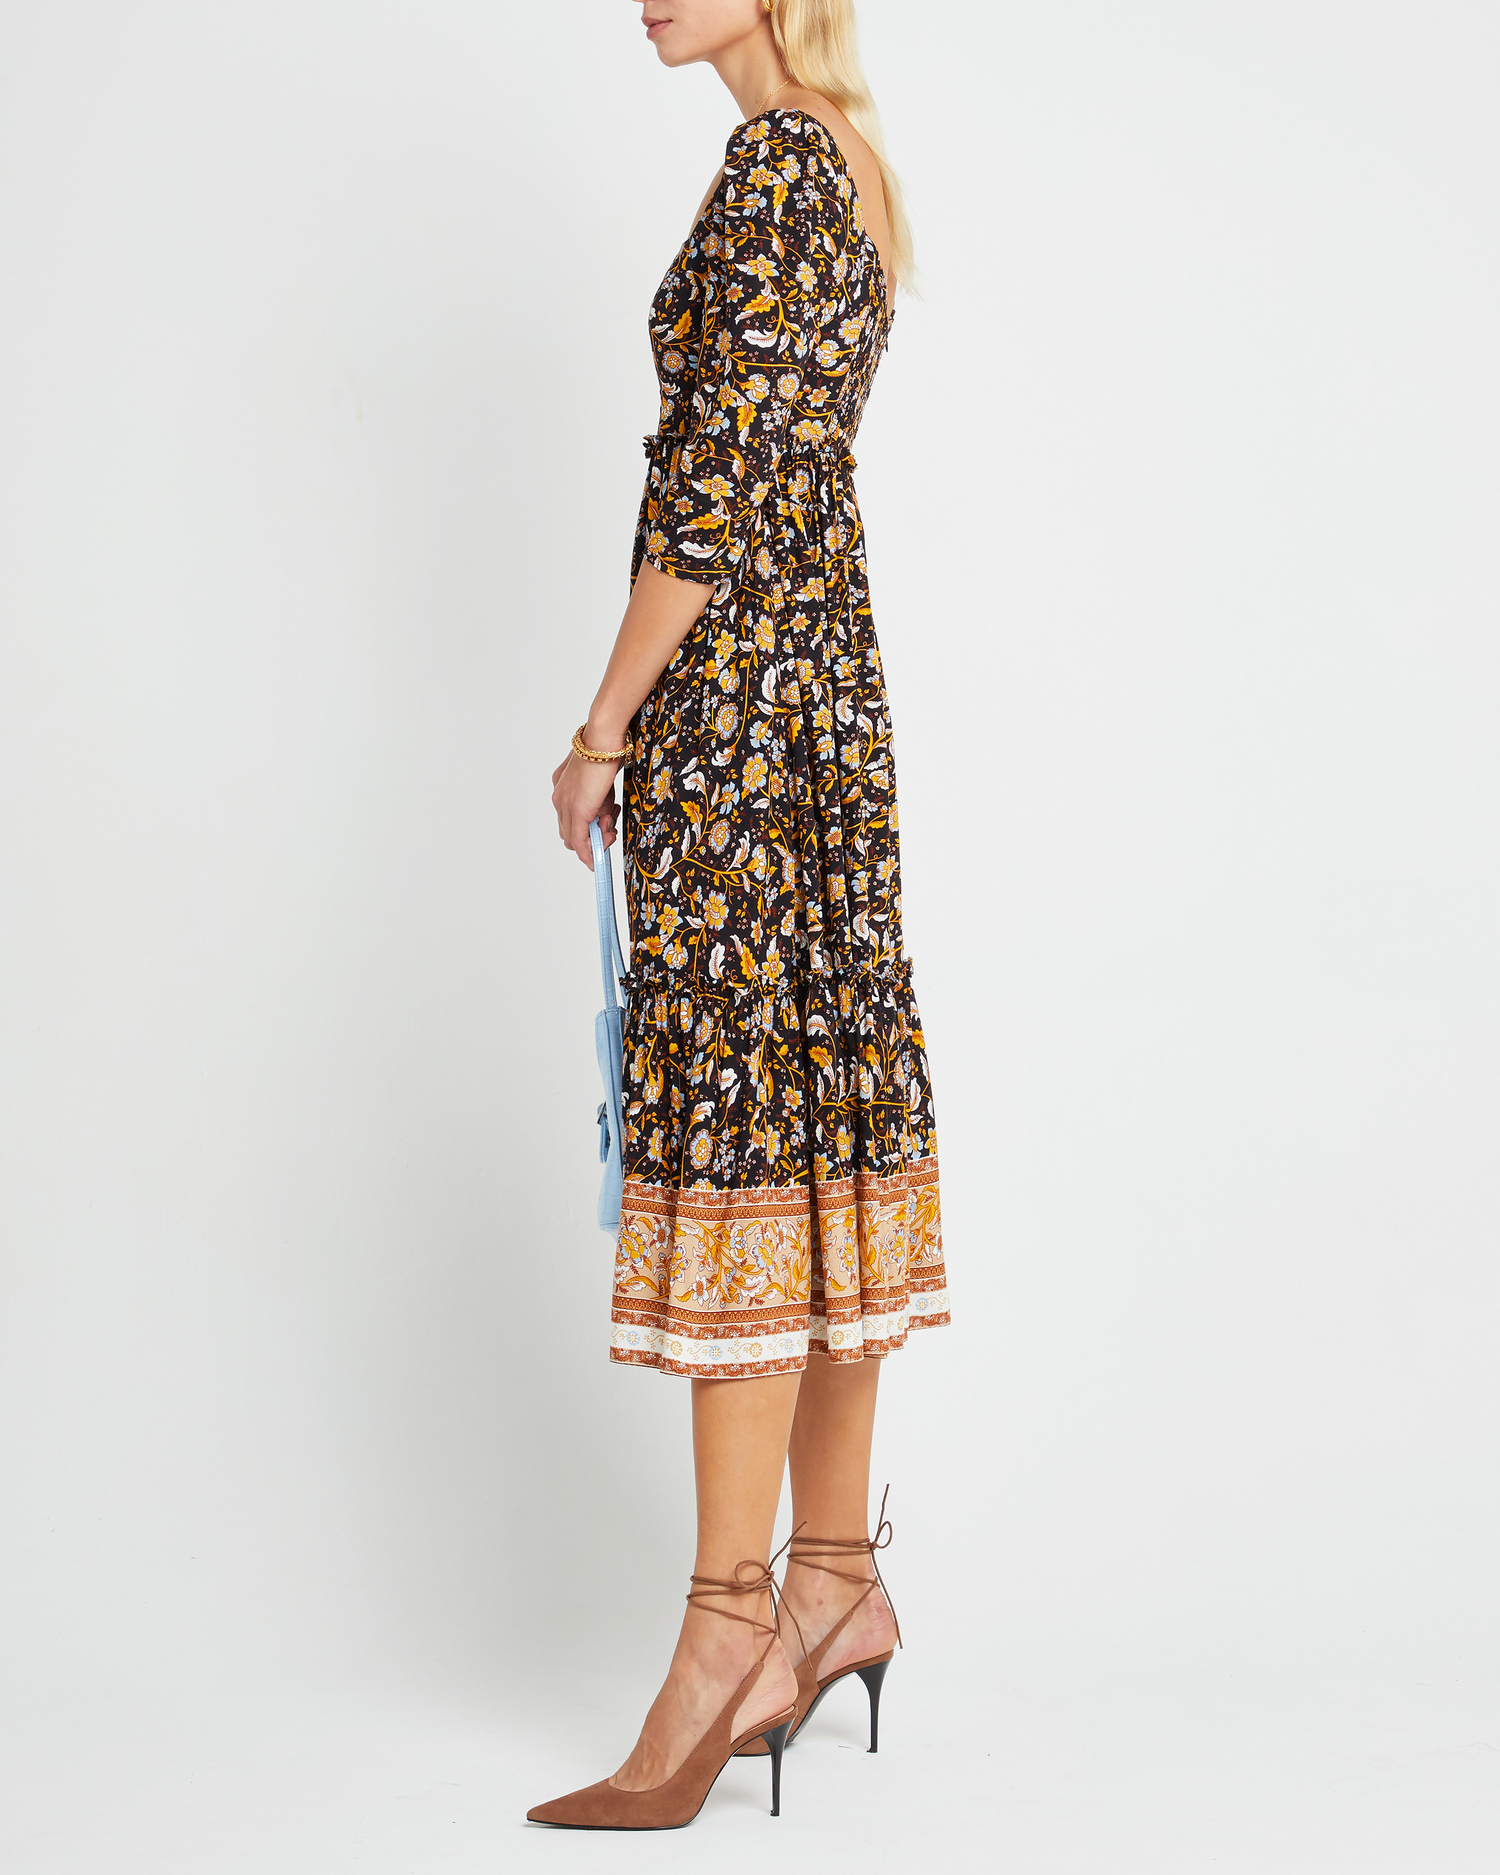 Third image of Willow Dress, a floral midi dress, floral, square neckline, 3/4 sleeves, fall, floral, pockets